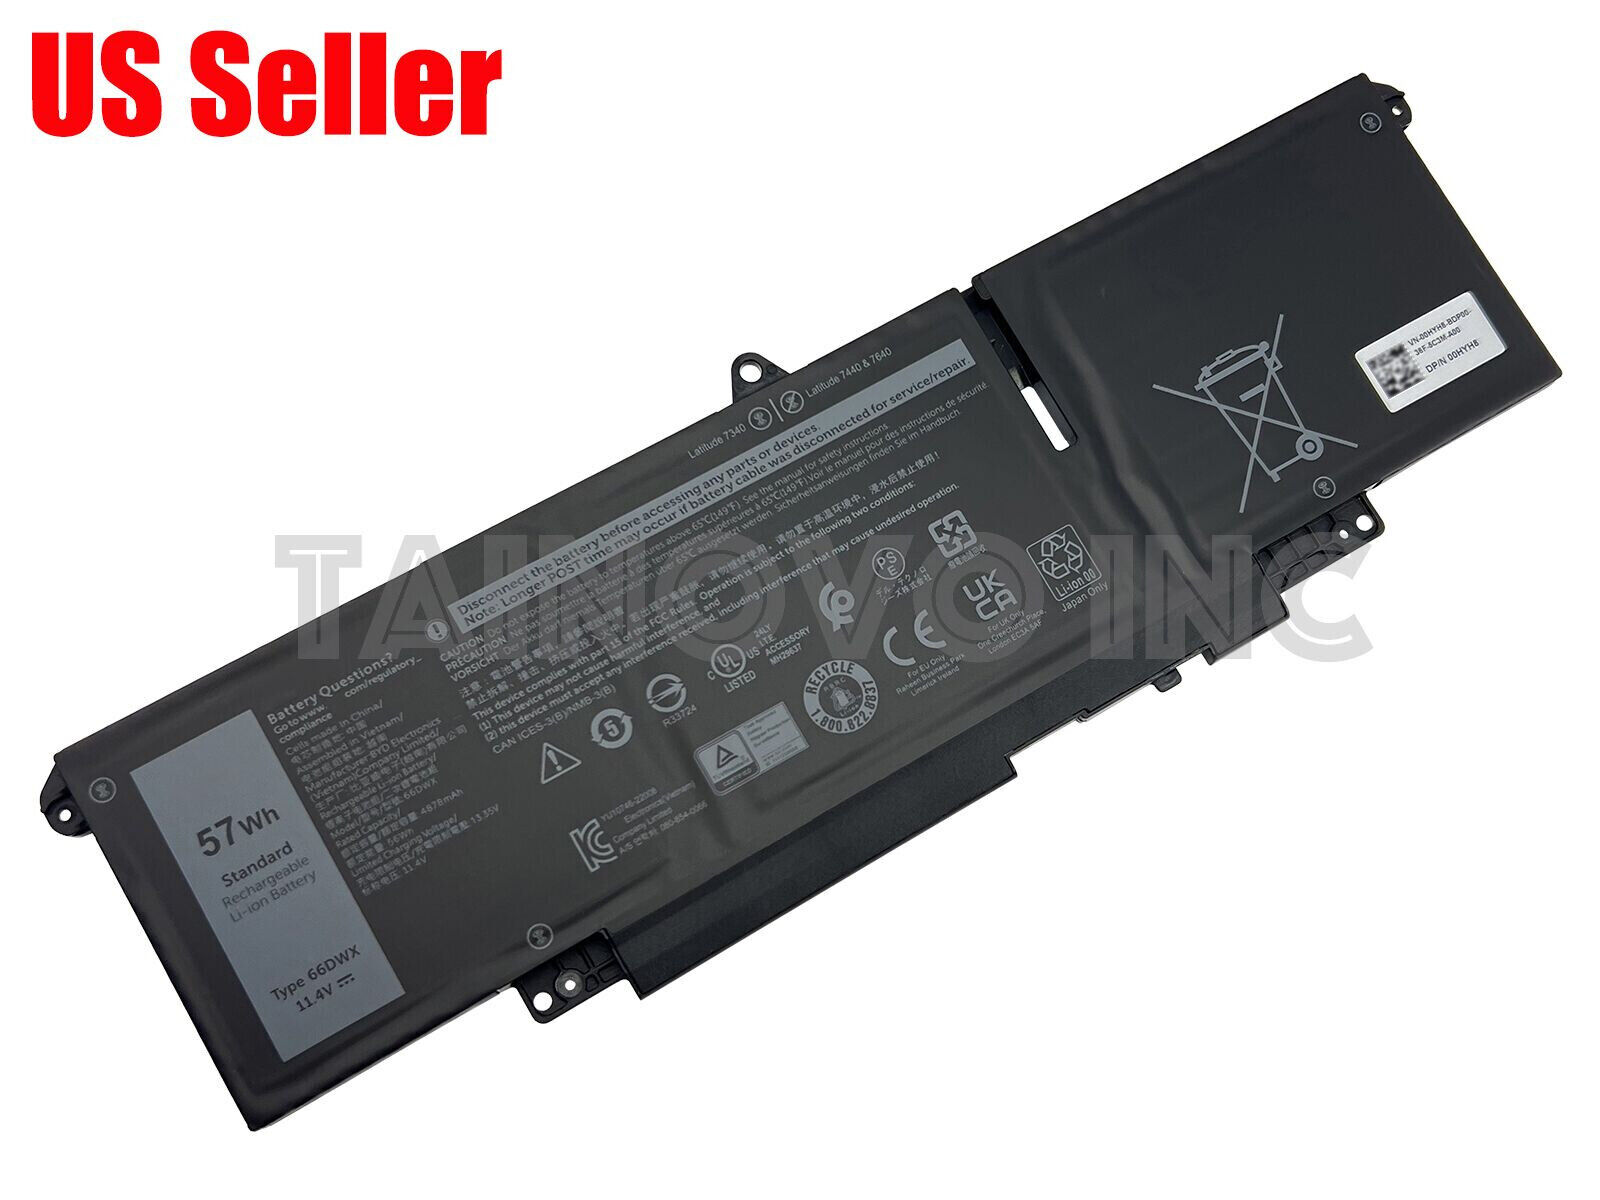 New 66DWX Battery for Dell Latitude 7340 7350 7440 7450 7640 7650 0HYH8 86D0Y